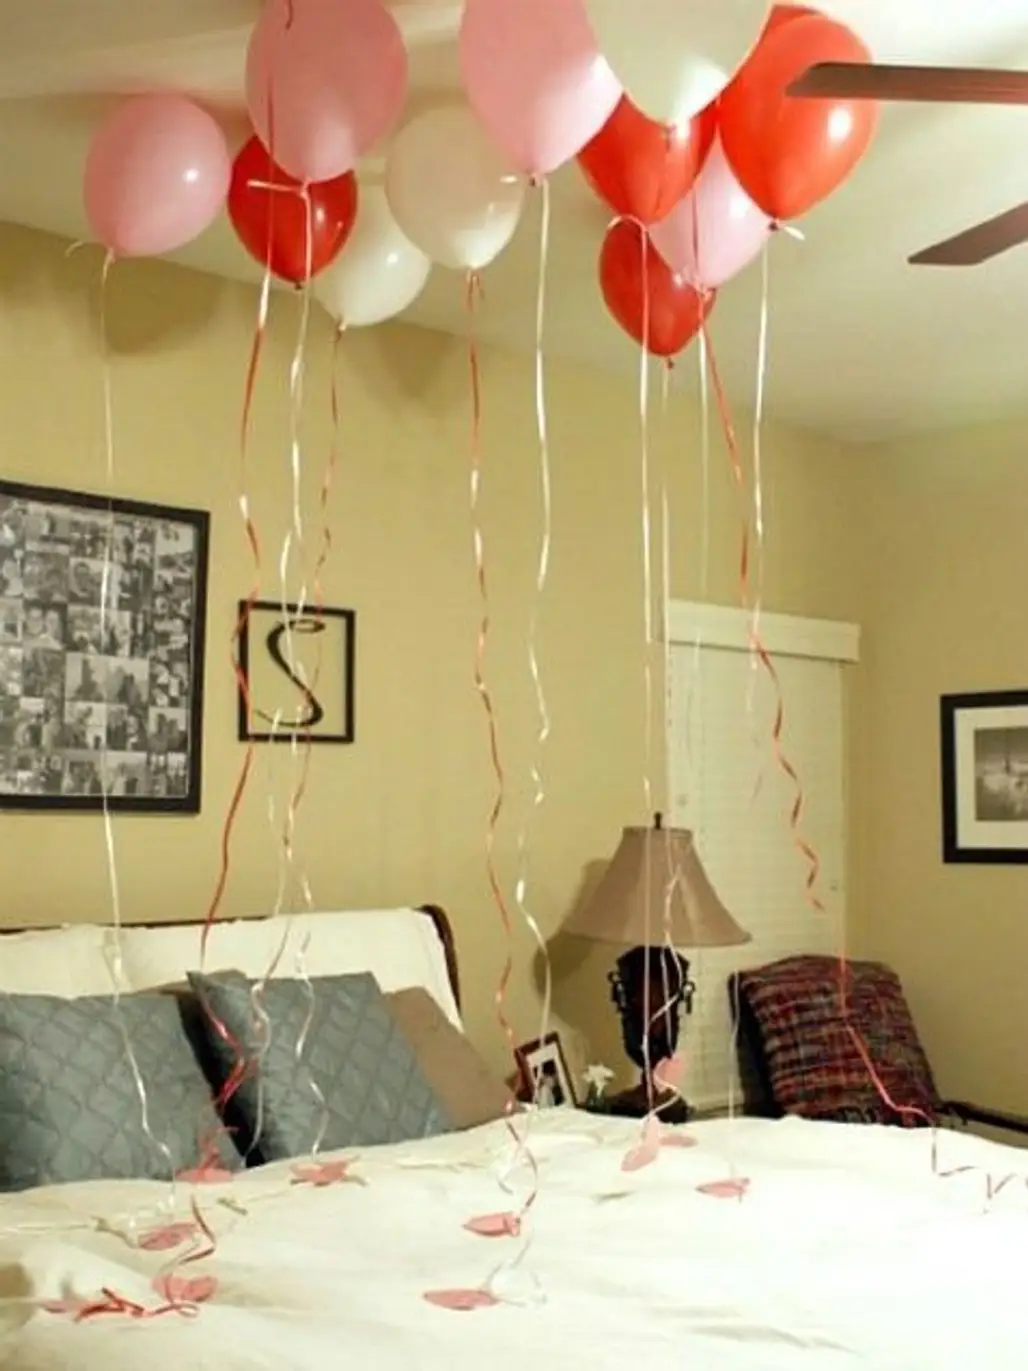 Attach Love Notes to Balloons